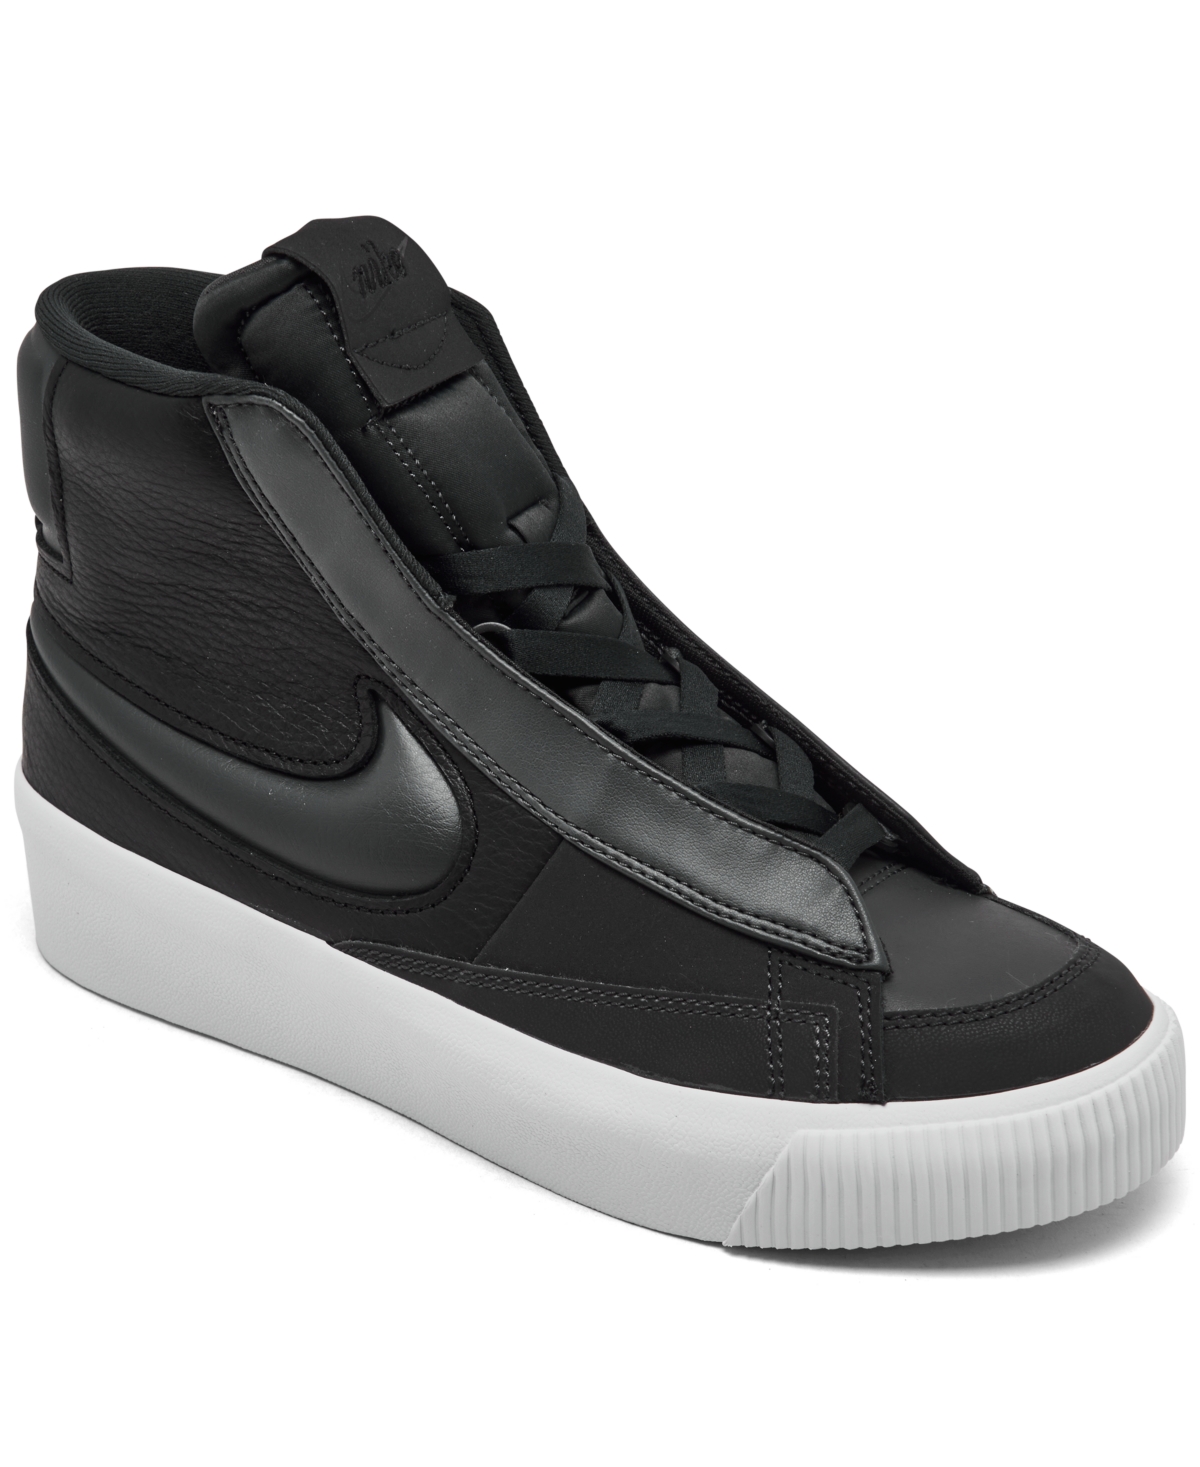 NIKE WOMEN'S BLAZER MID VICTORY CASUAL SNEAKERS FROM FINISH LINE